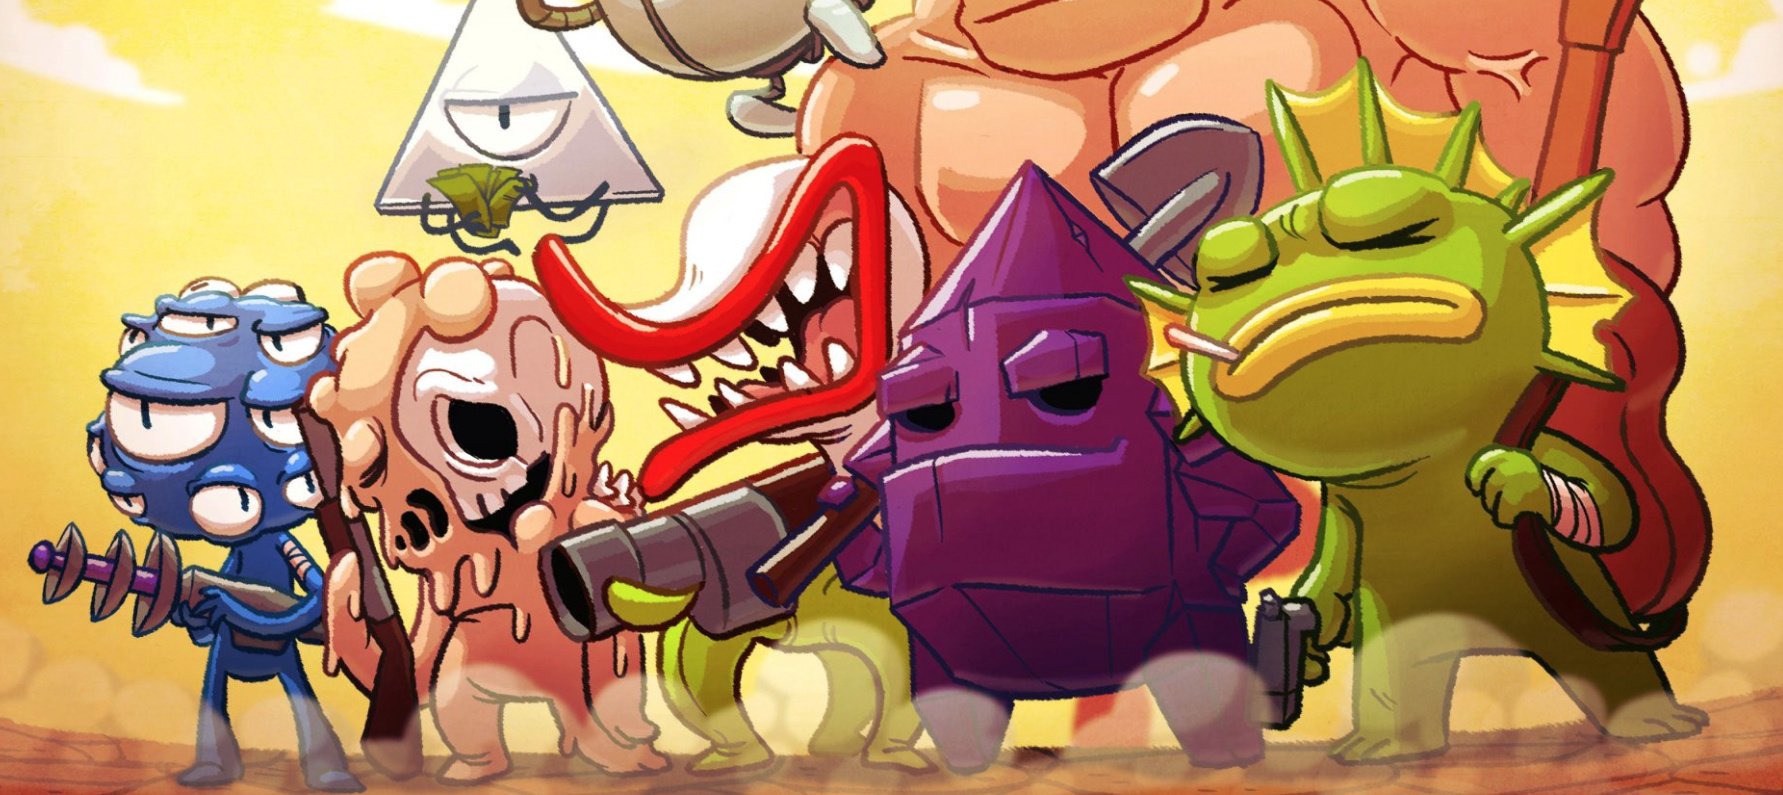 download free nuclear throne price